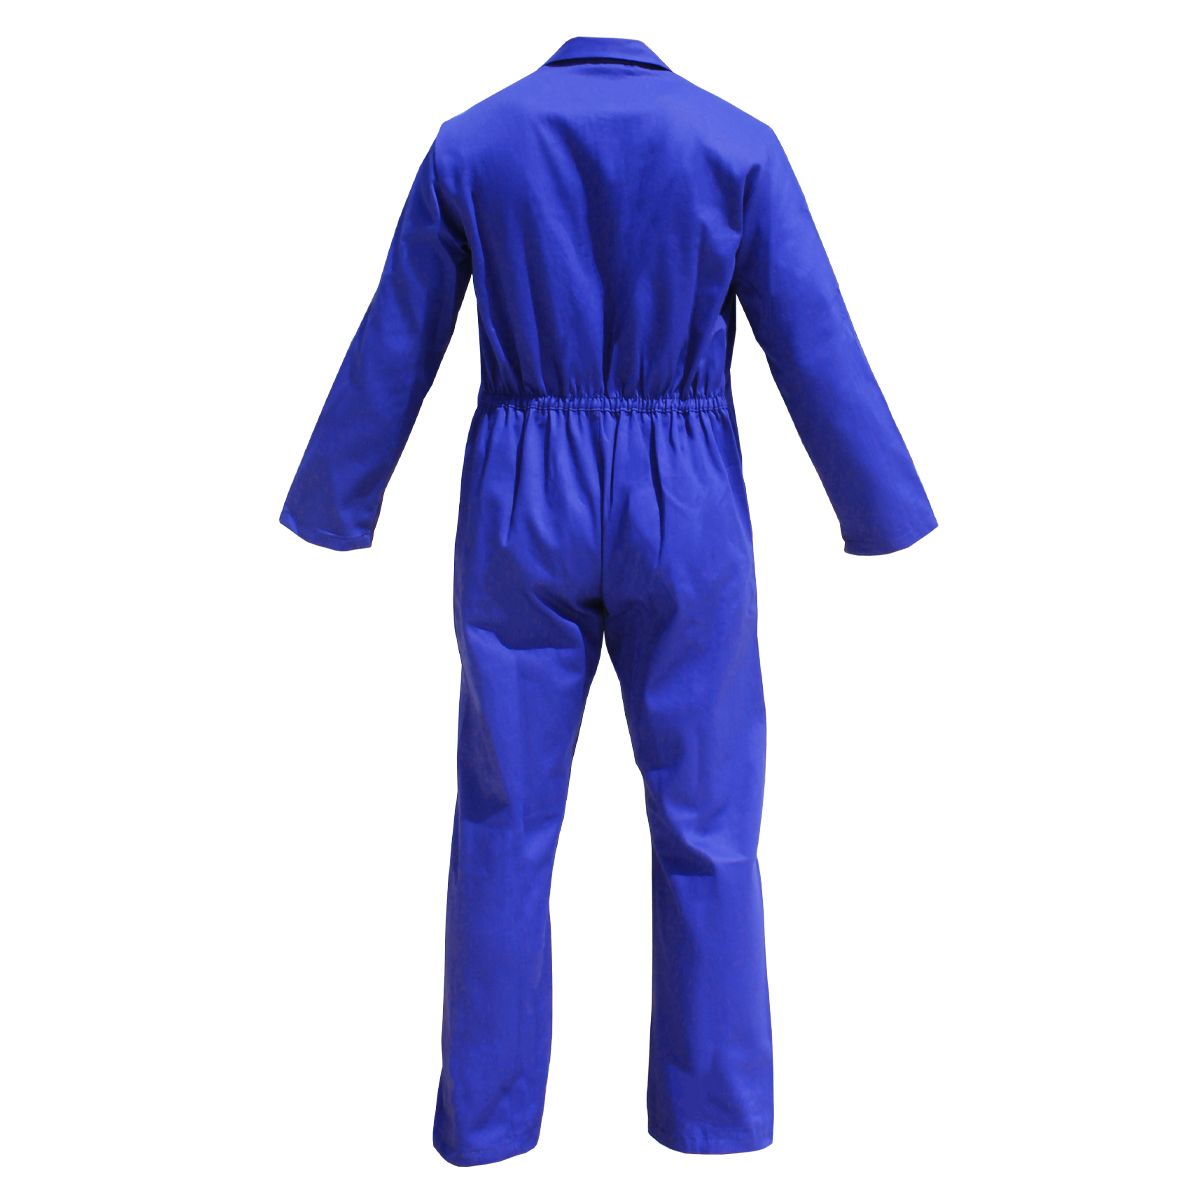 LUTHOR SUPER COVERALL